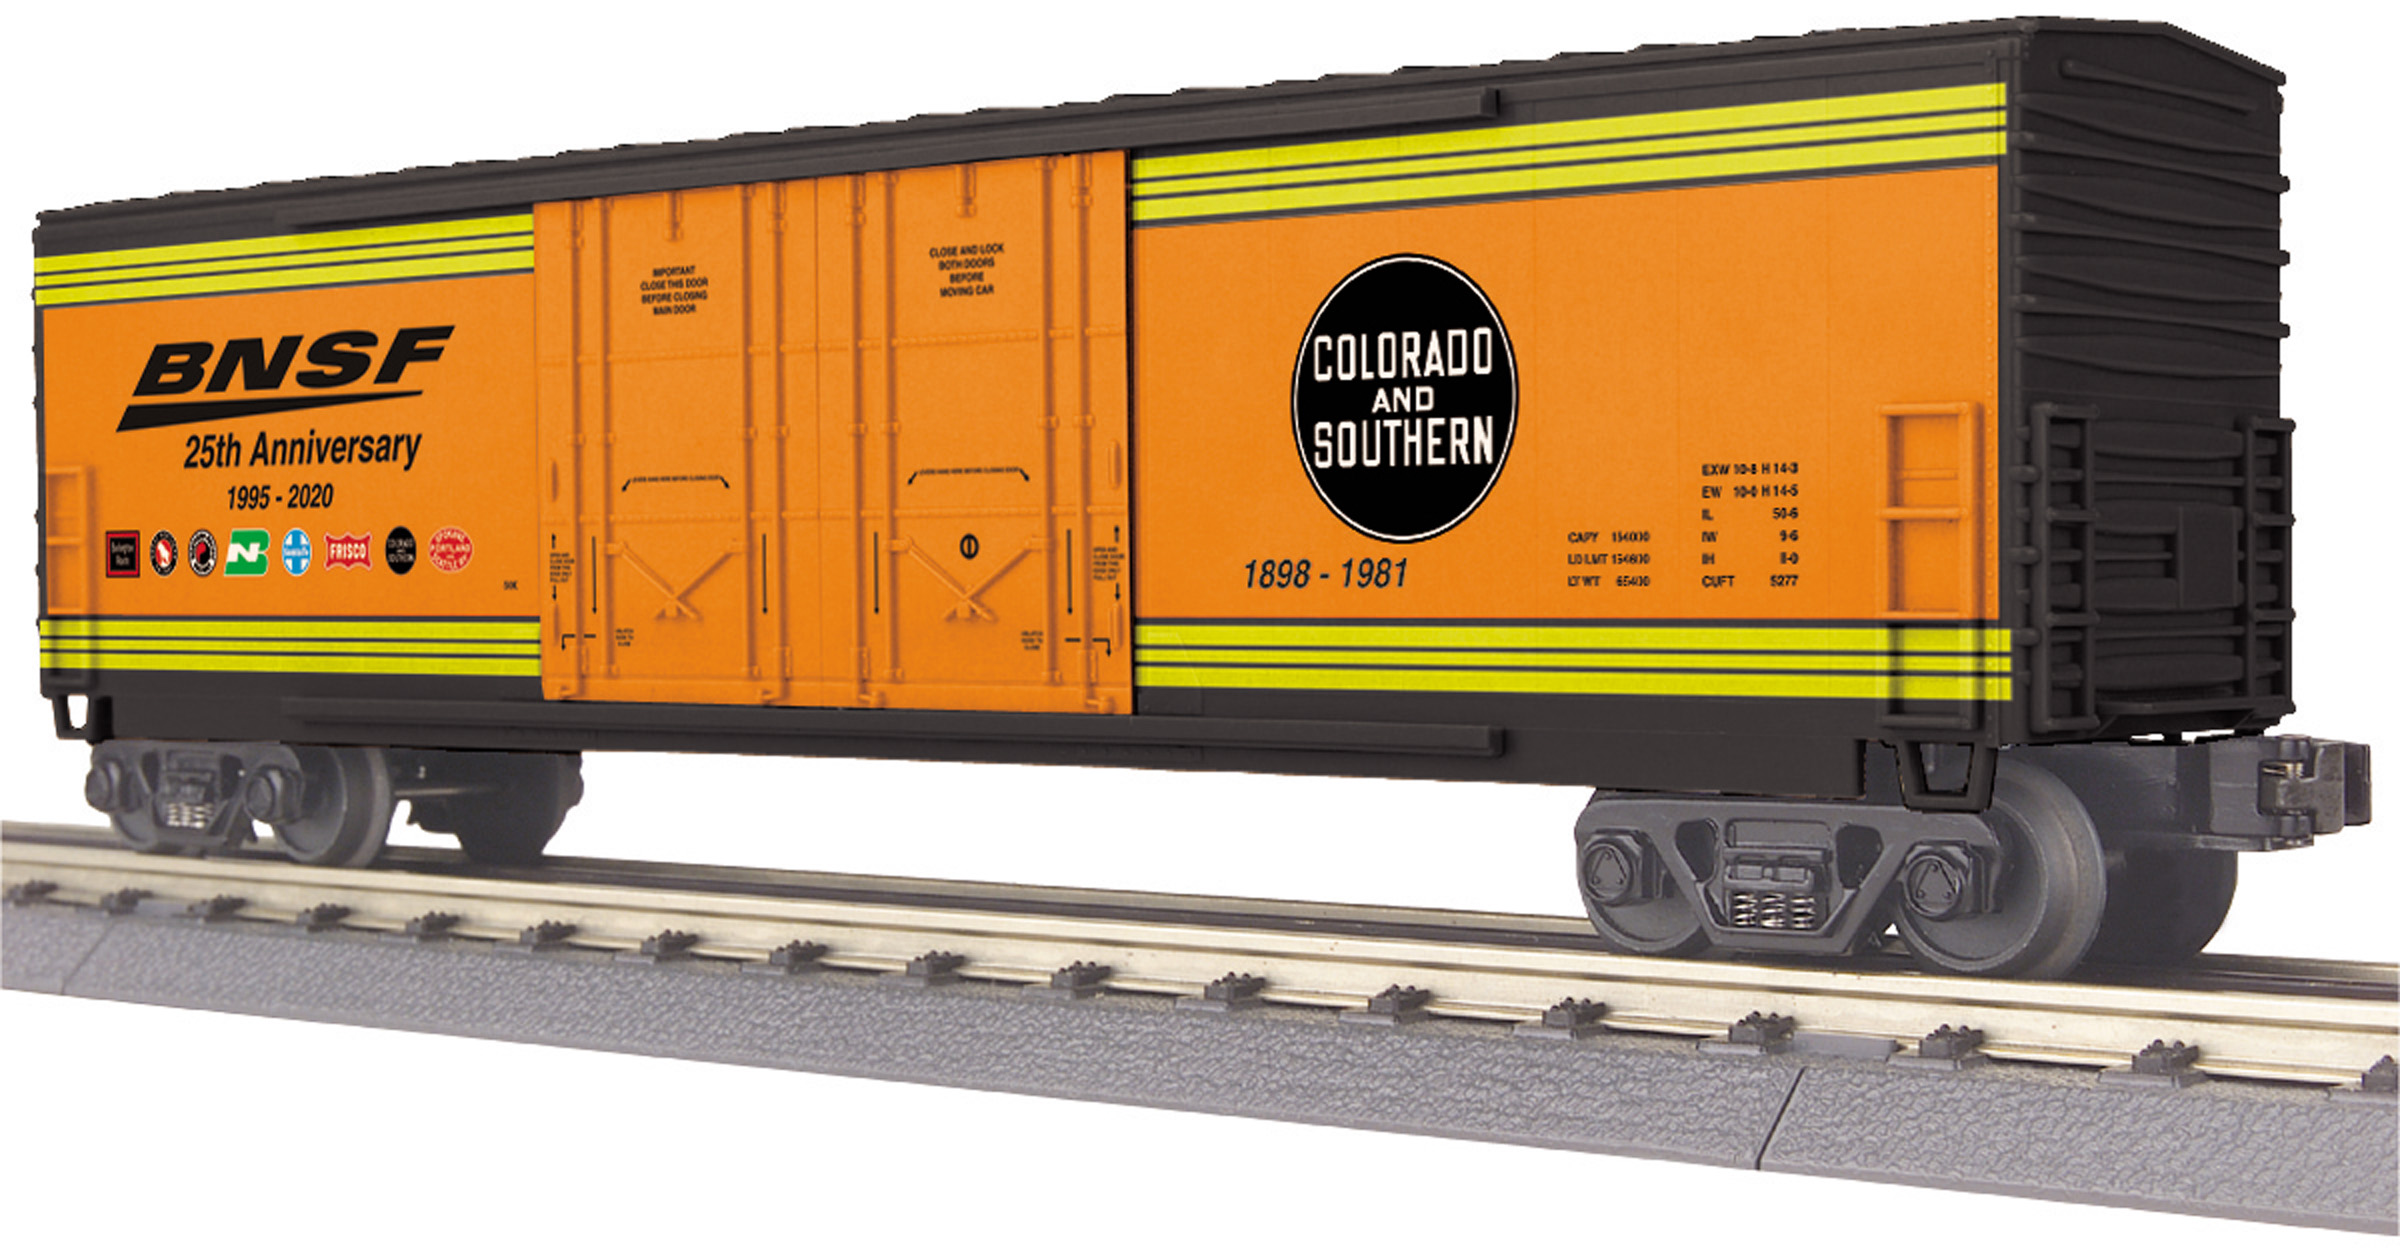 BNSF (25th Anniversary) 8-Car 50' Double Door Plugged Boxcar - Colorado and Southern image